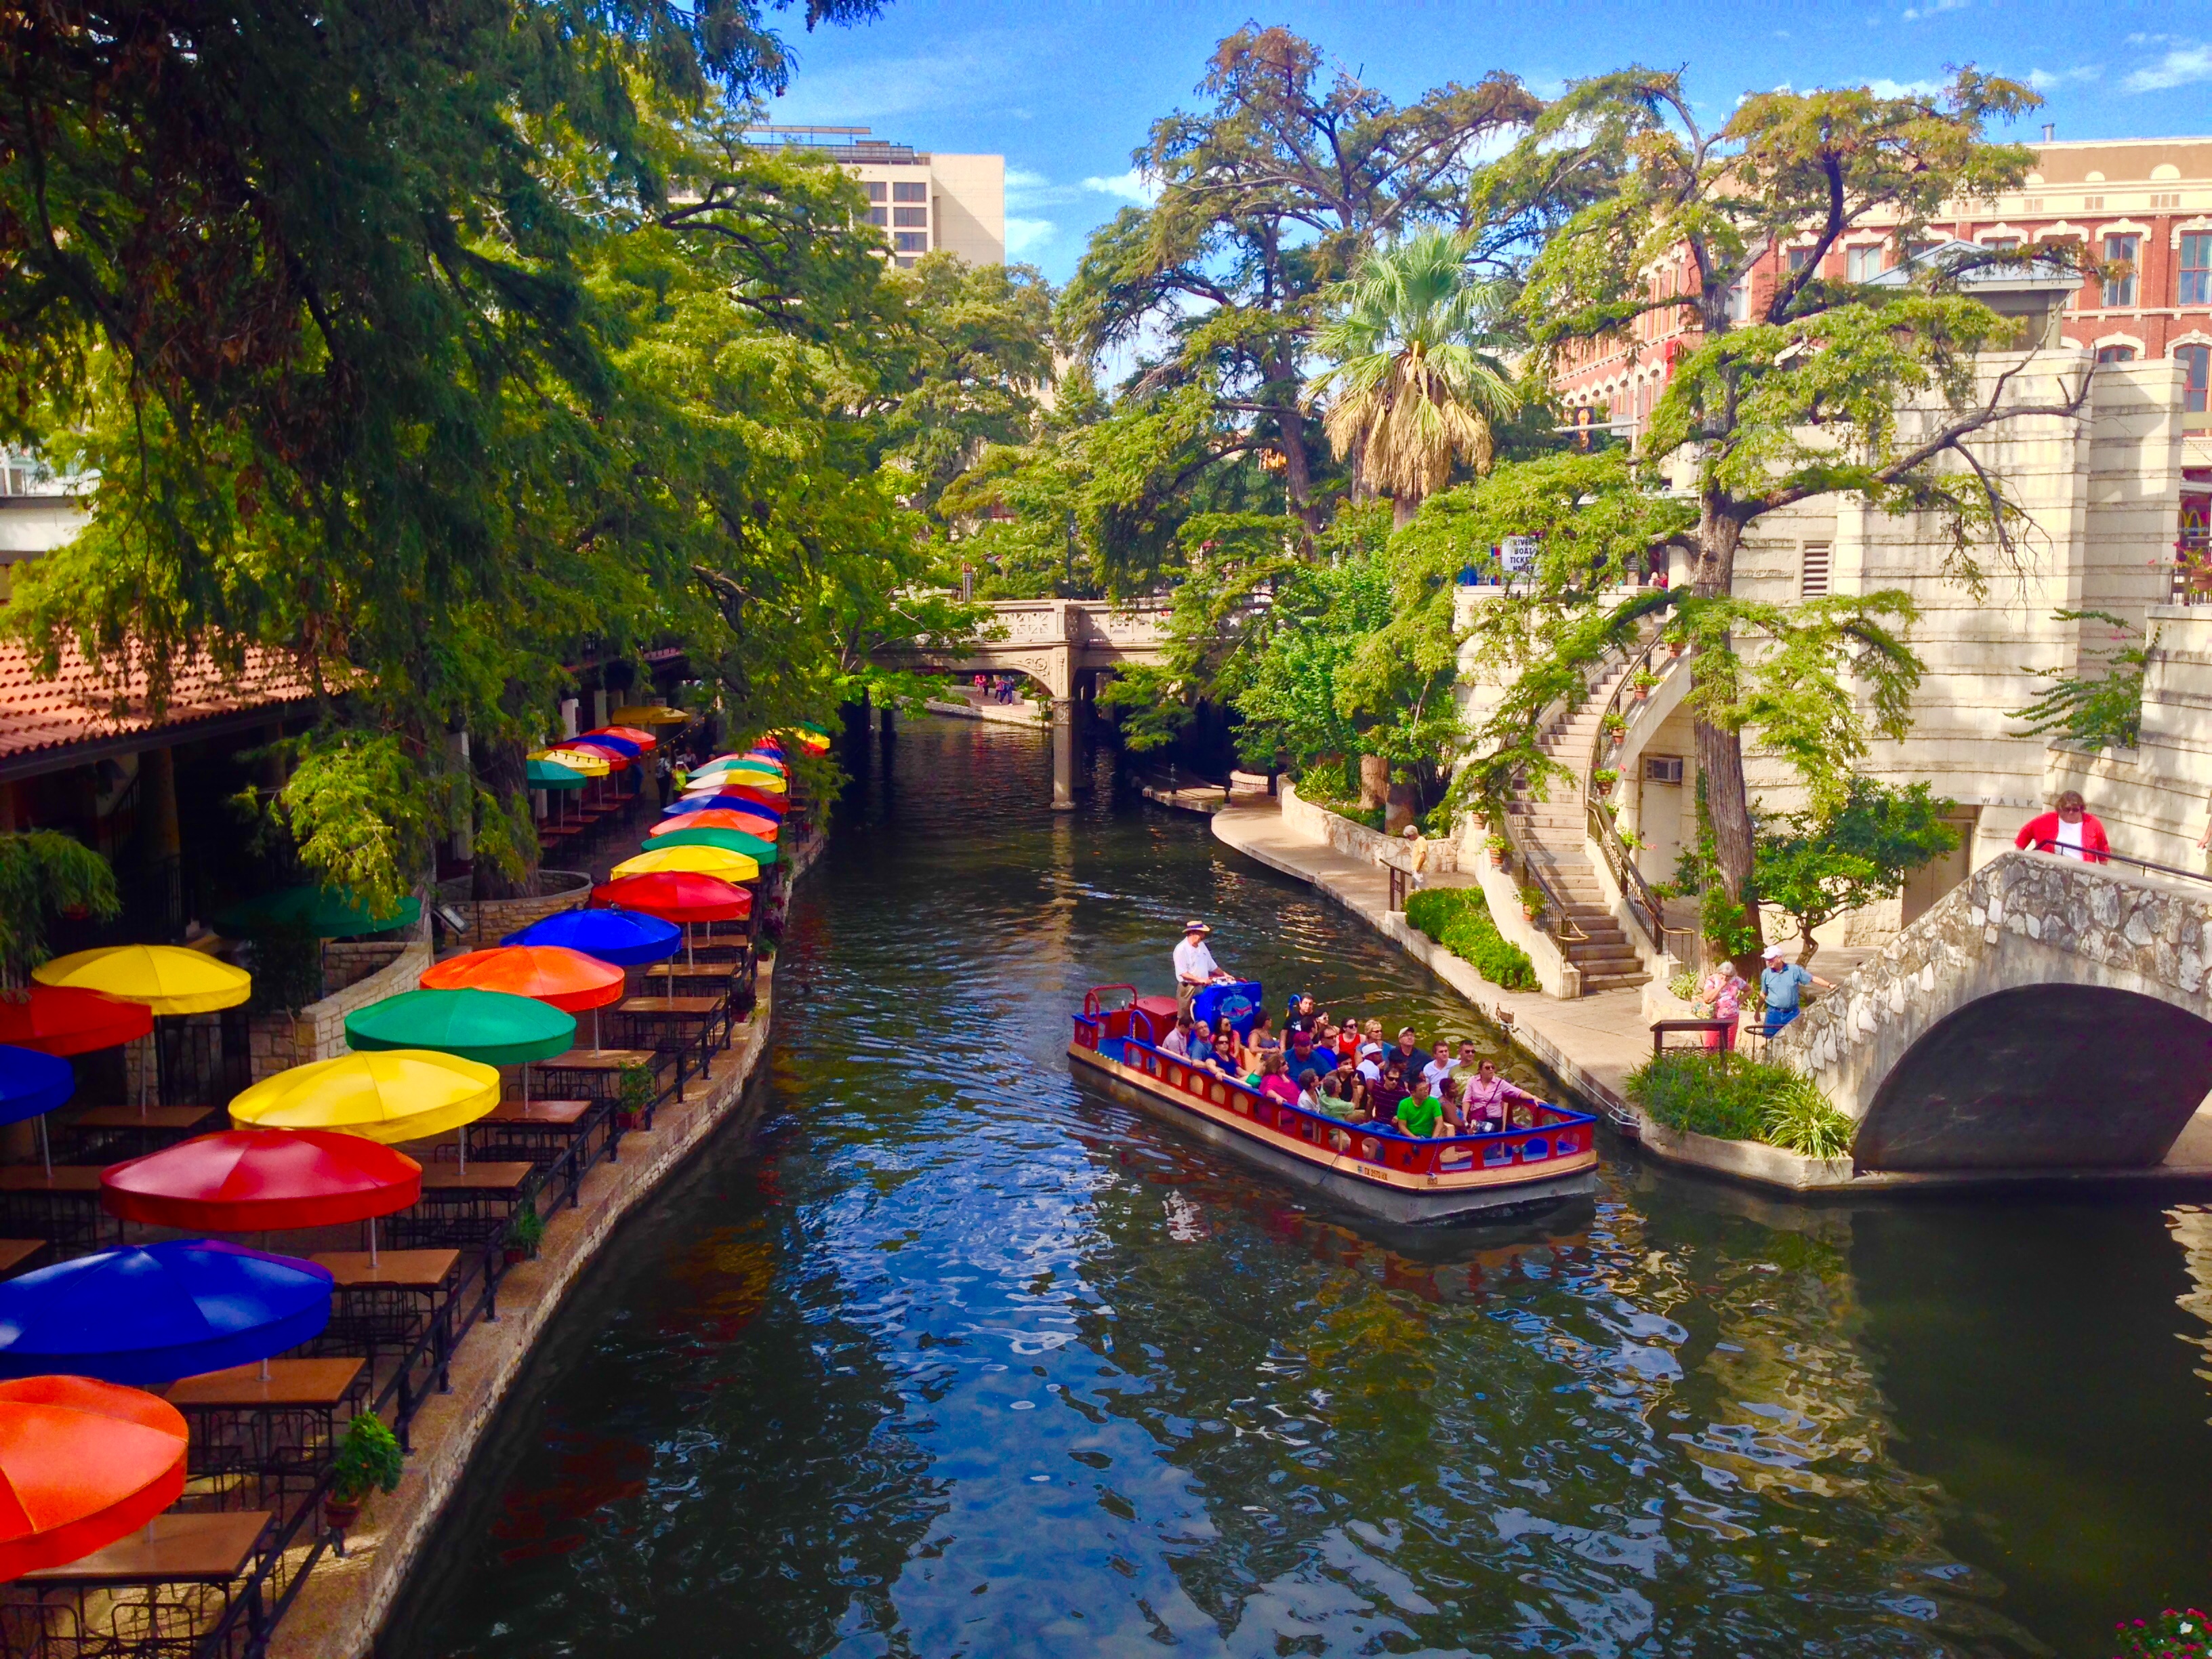 Texas history: How the San Antonio River Walk came to be